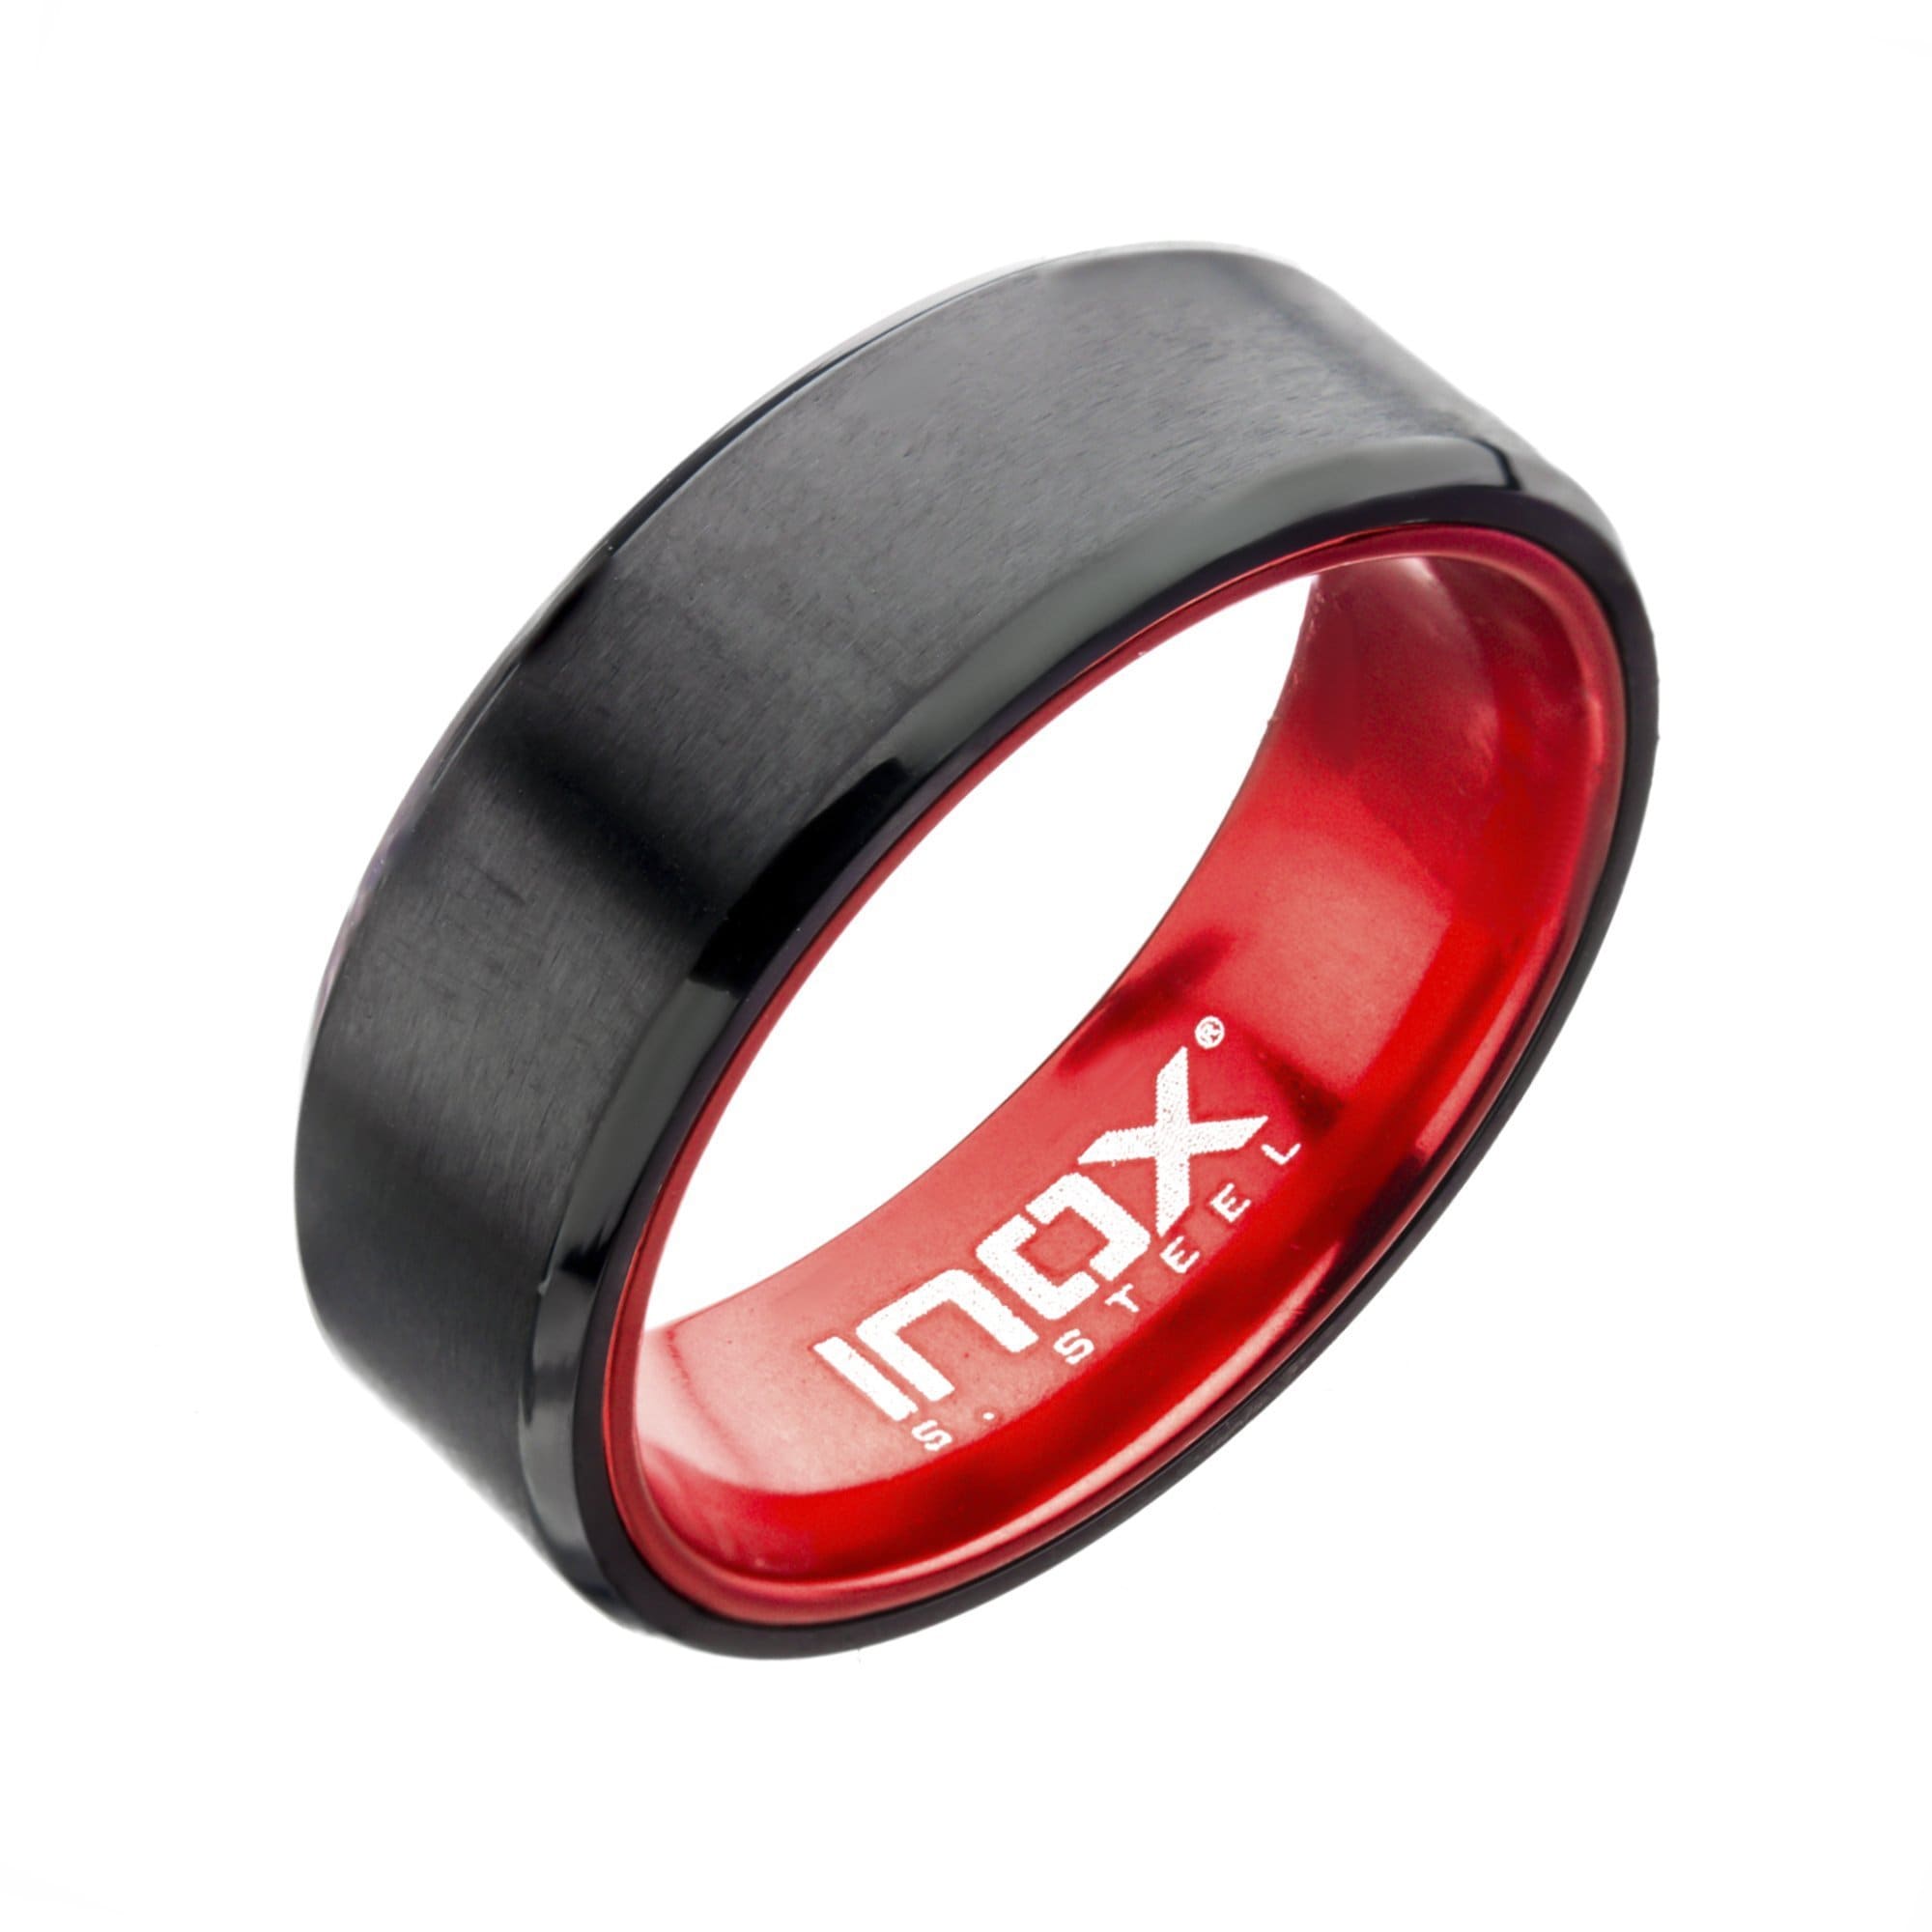 INOX JEWELRY Rings Black Stainless Steel with Red Aluminum Detail Band Ring